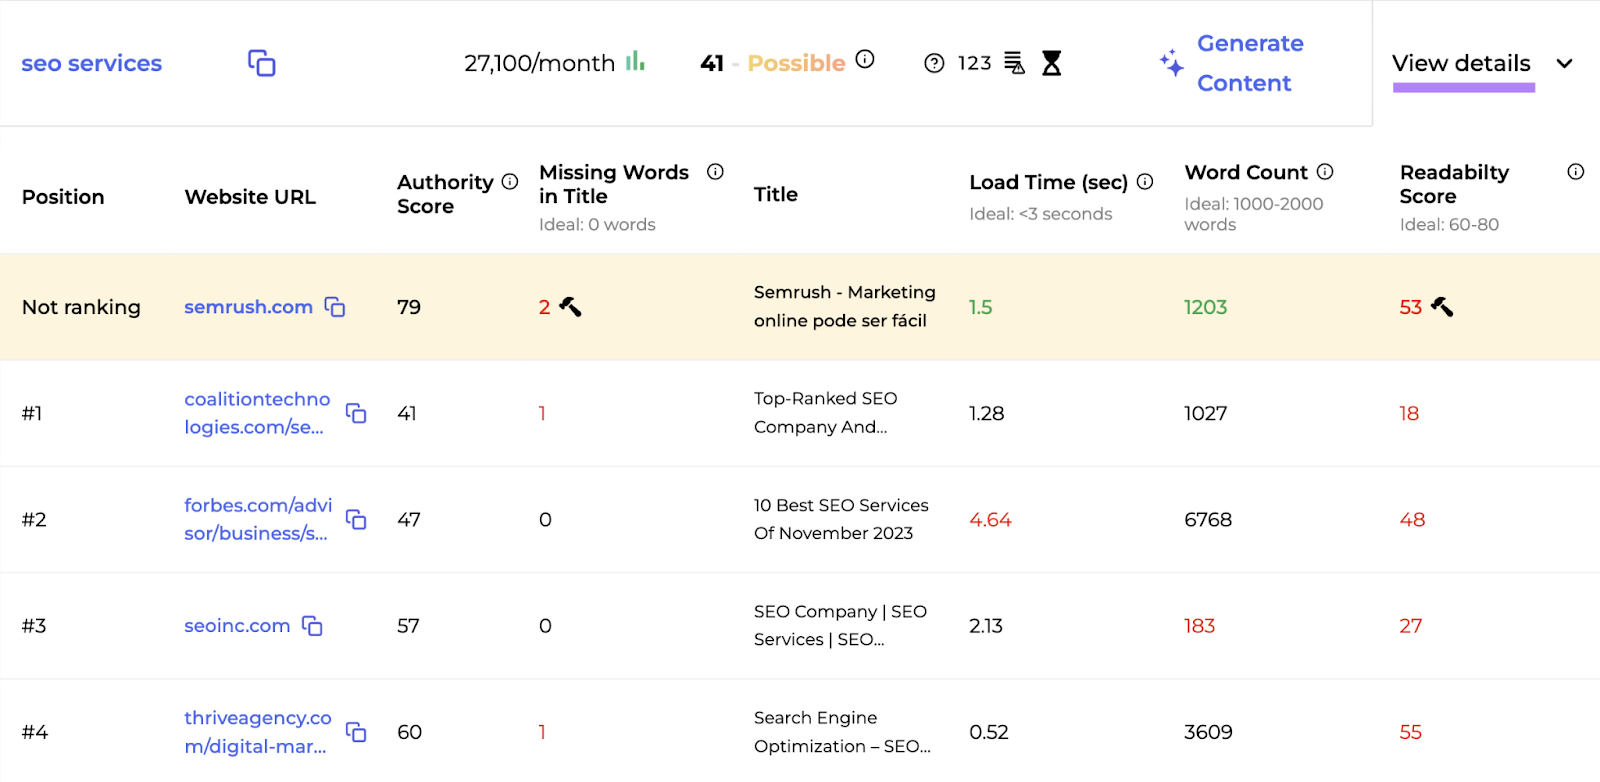 SERP Gap Analyzer app helps you find   weaknesses successful  the top-ranking content